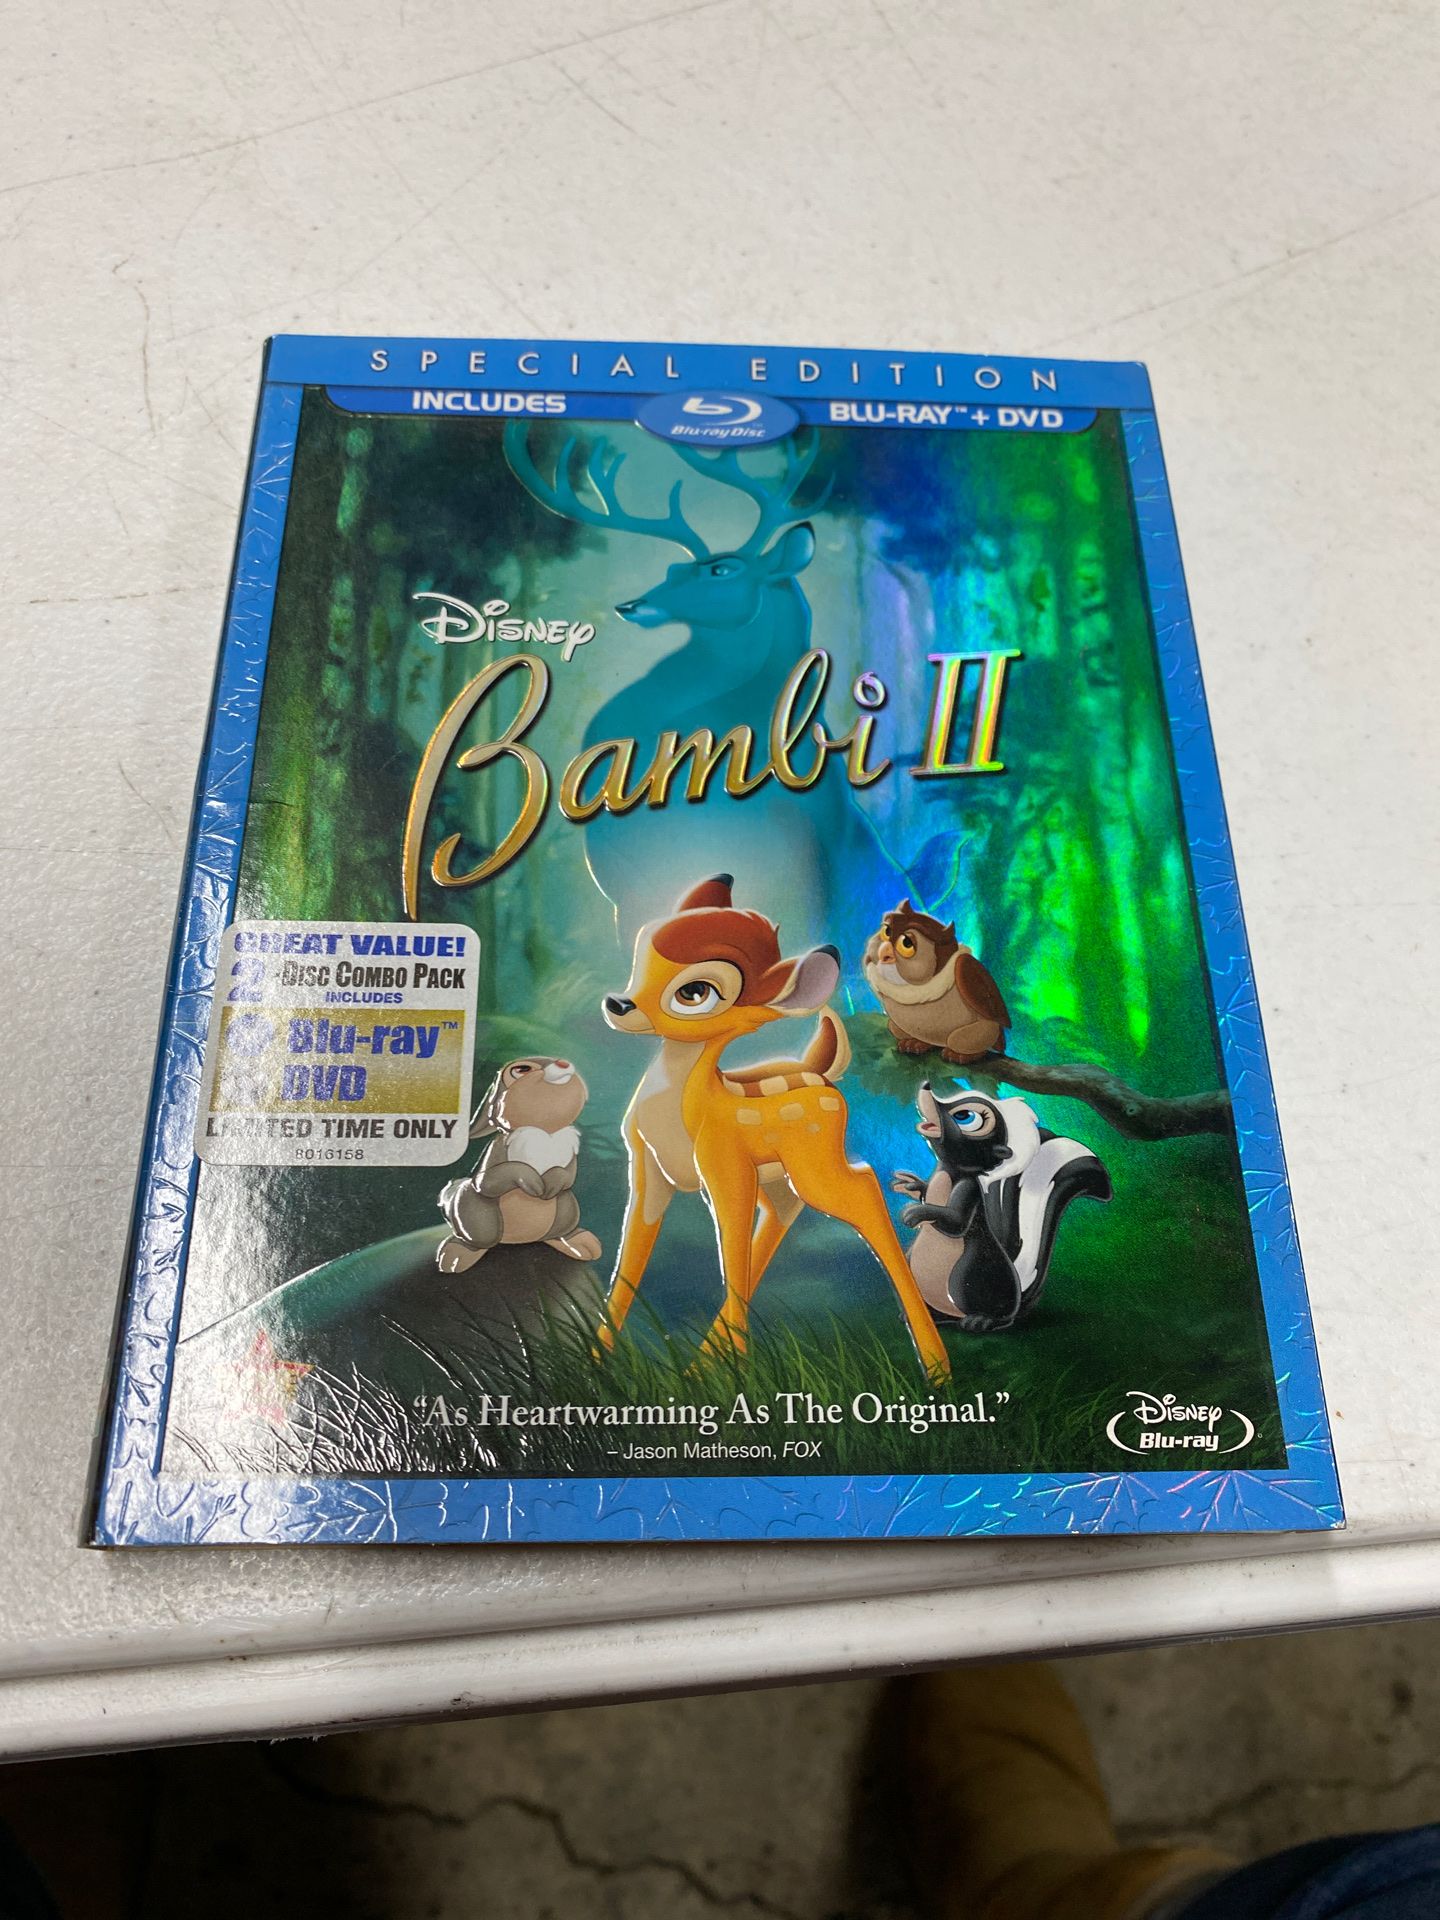 Bambi 2 special edition Blu-ray DVD